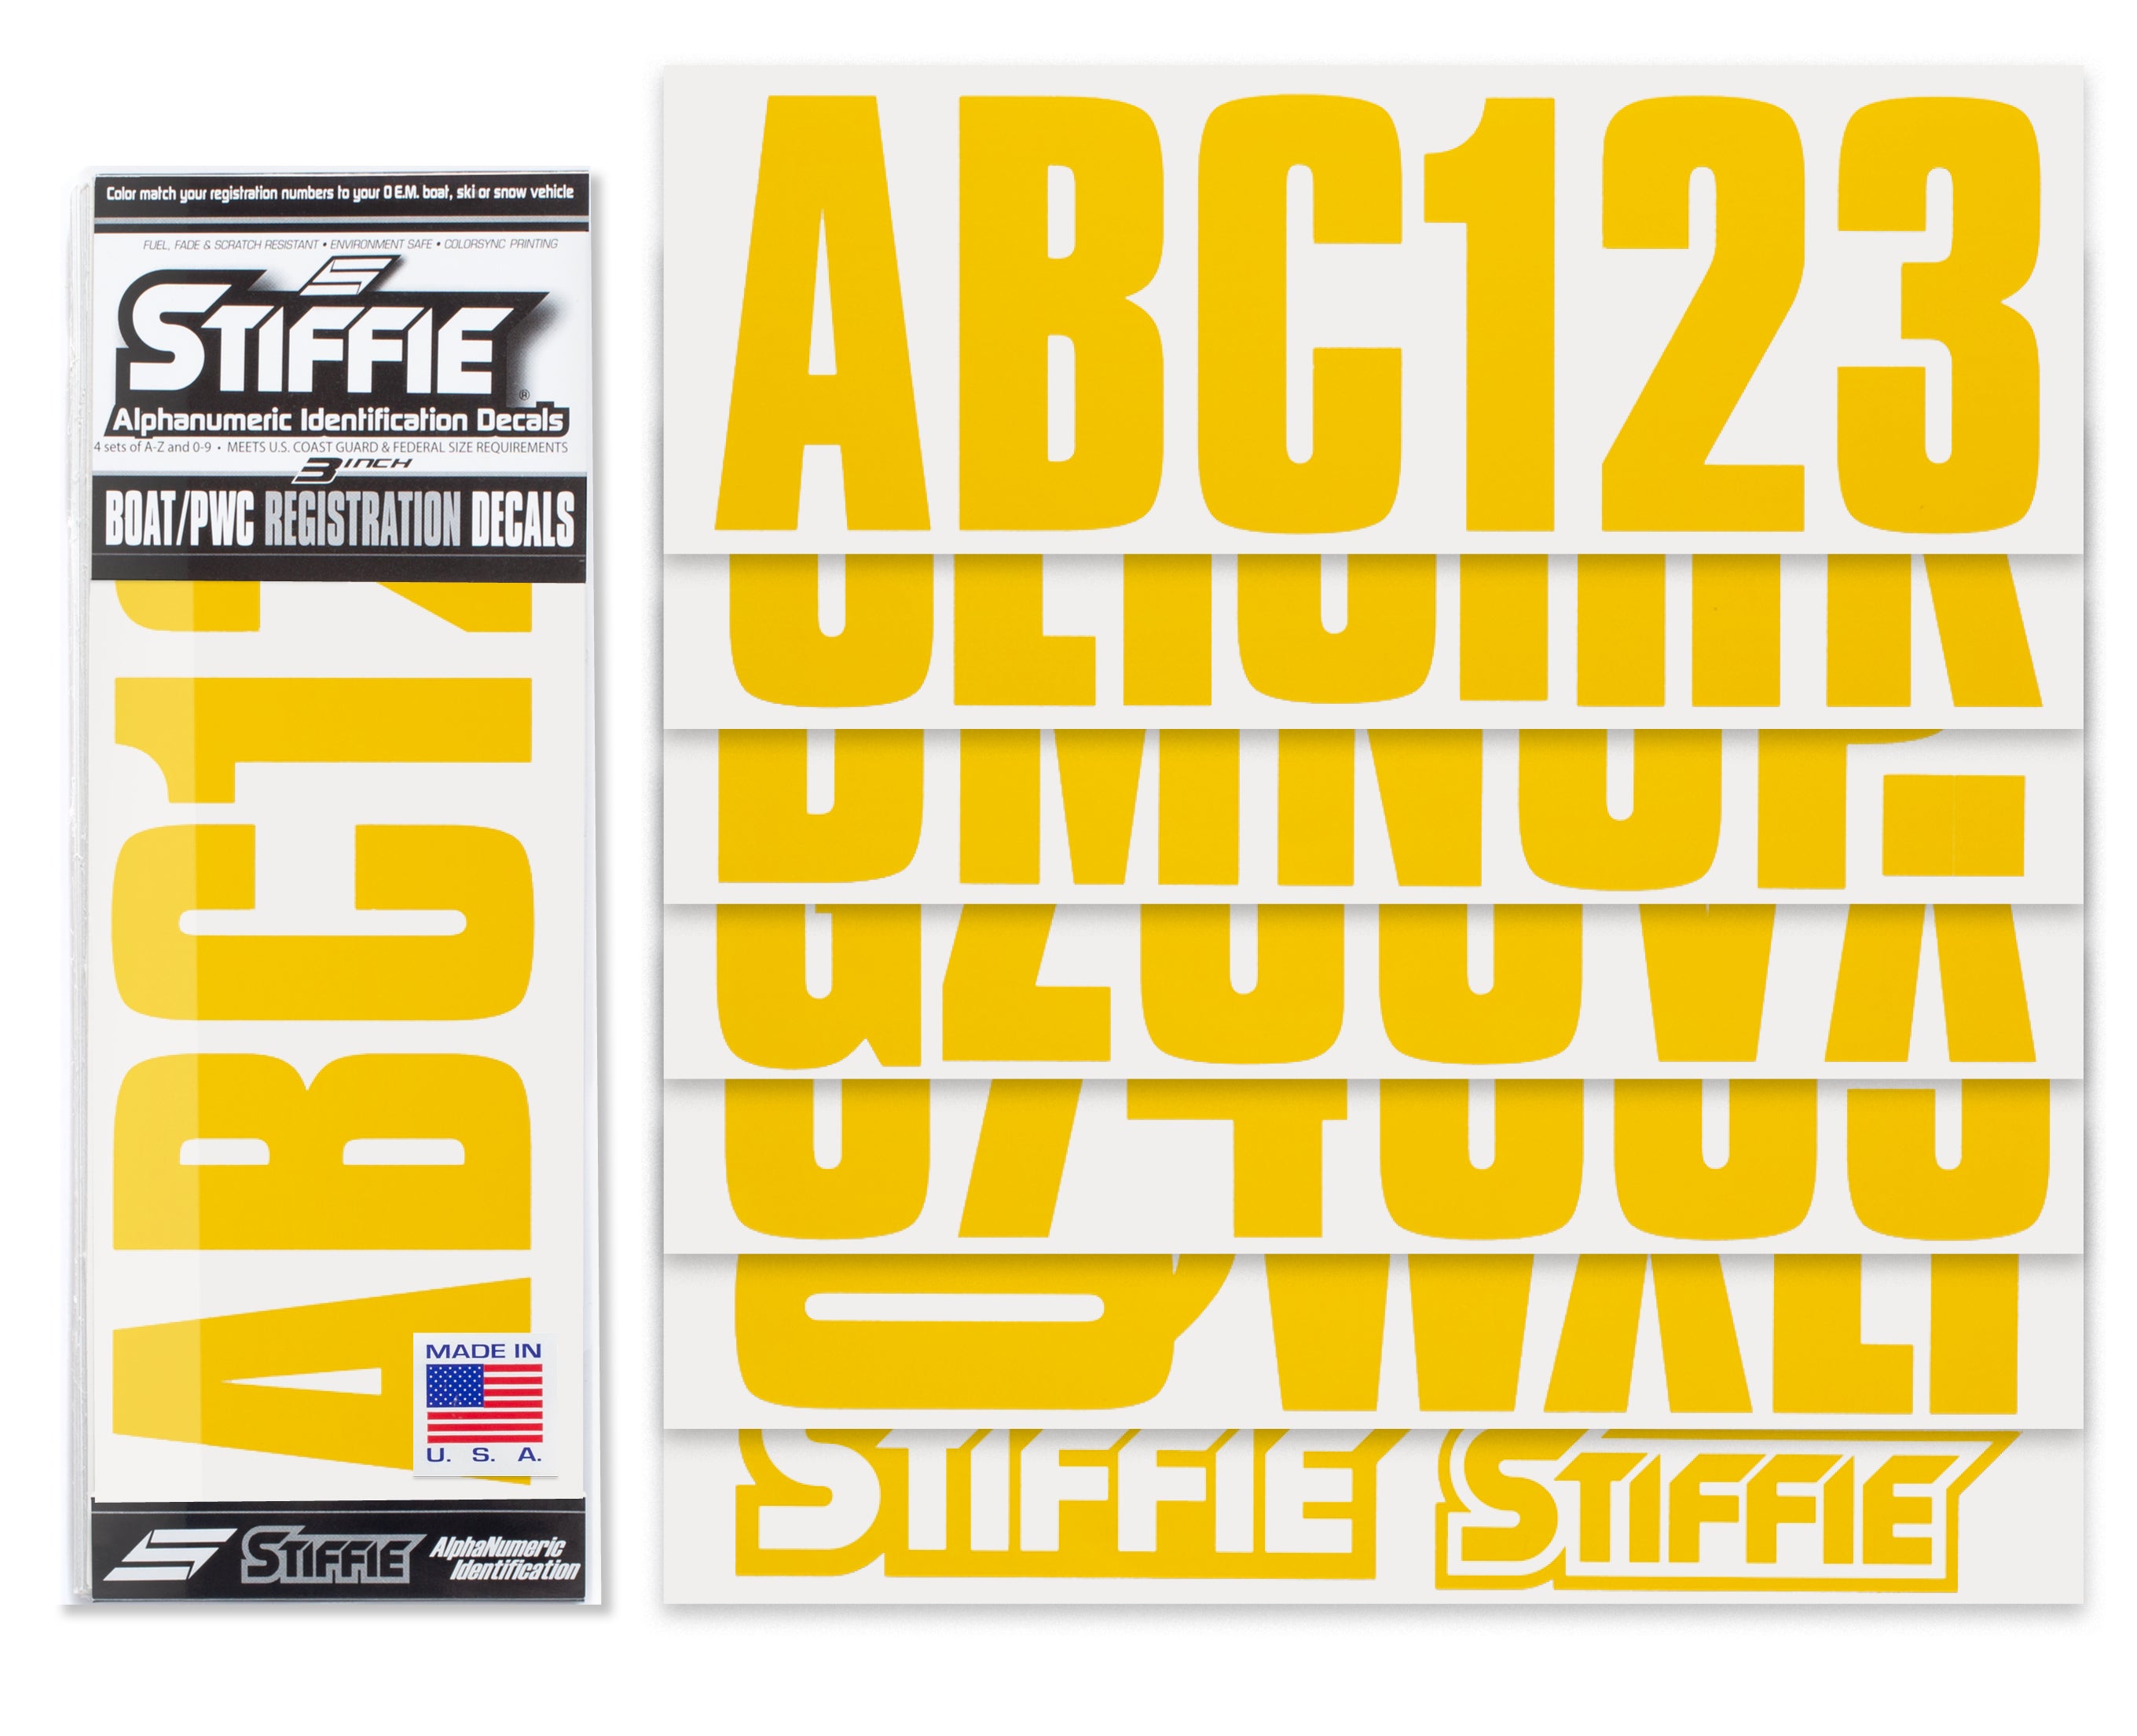 STIFFIE Uniline Sun Gold 3" ID Kit Alpha-Numeric Registration Identification Numbers Stickers Decals for Boats & Personal Watercraft